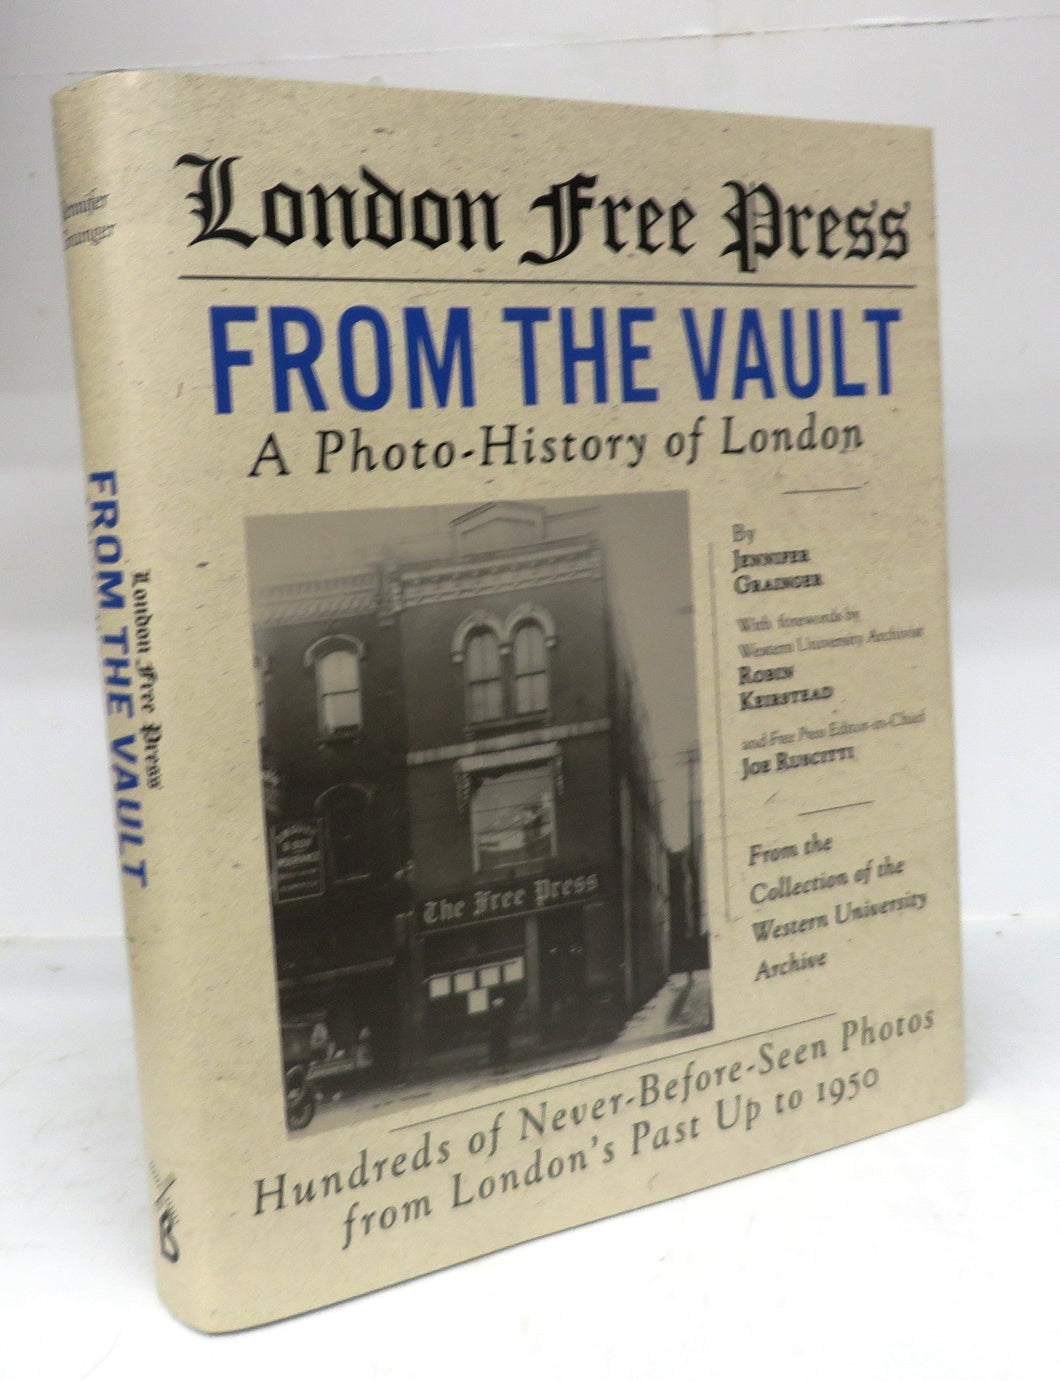 London Free Press. From The Vault: A Photo-History of London to 1950 From the Collection of The Western University Archive